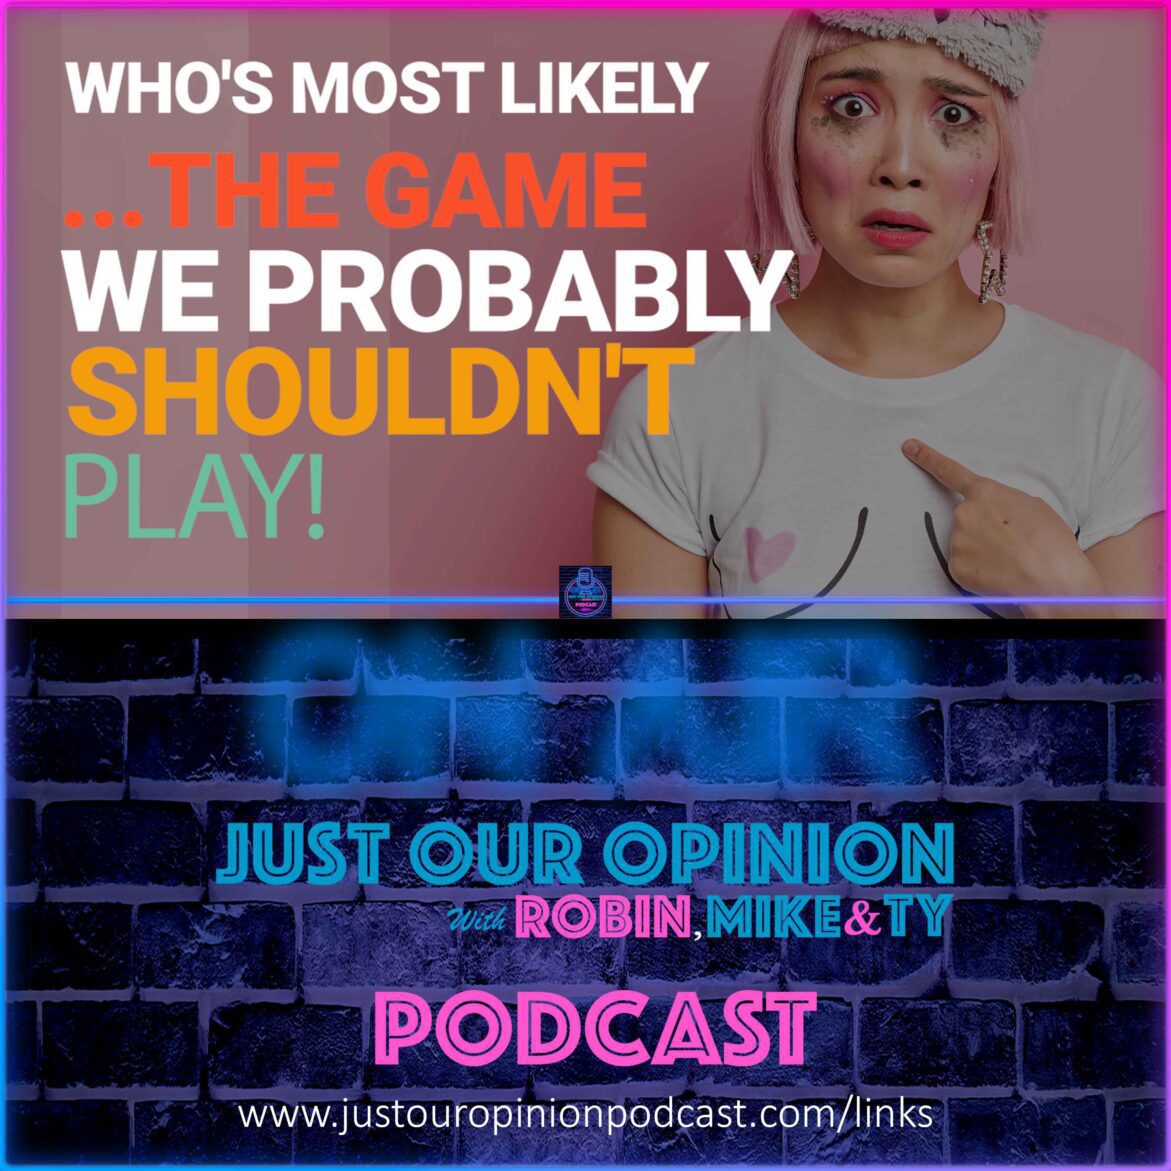 Black Podcasting - Who&apos;s Most Likely...The game we probably shouldn&apos;t play!